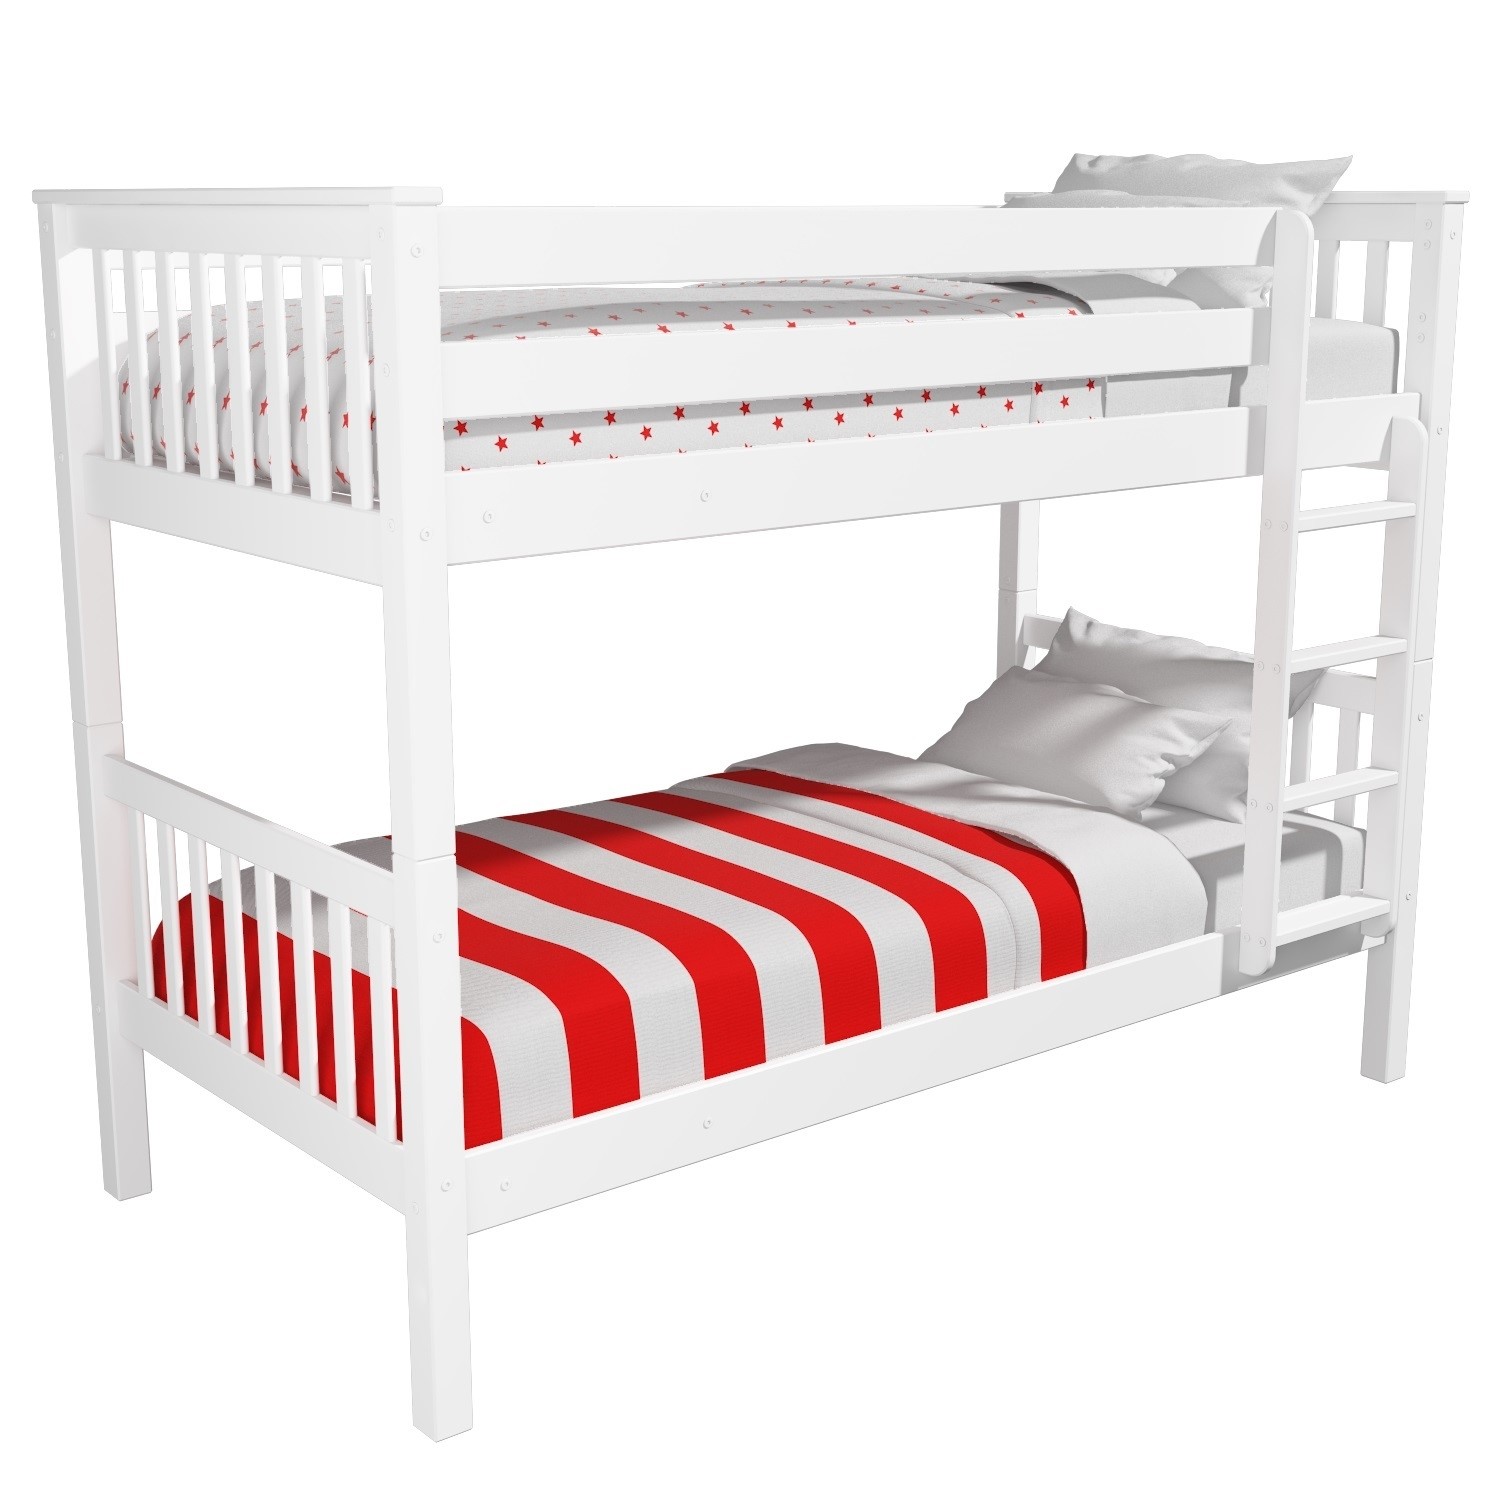 New High Quality Oxford Single Bunk Bed in White Bedroom Furniture 